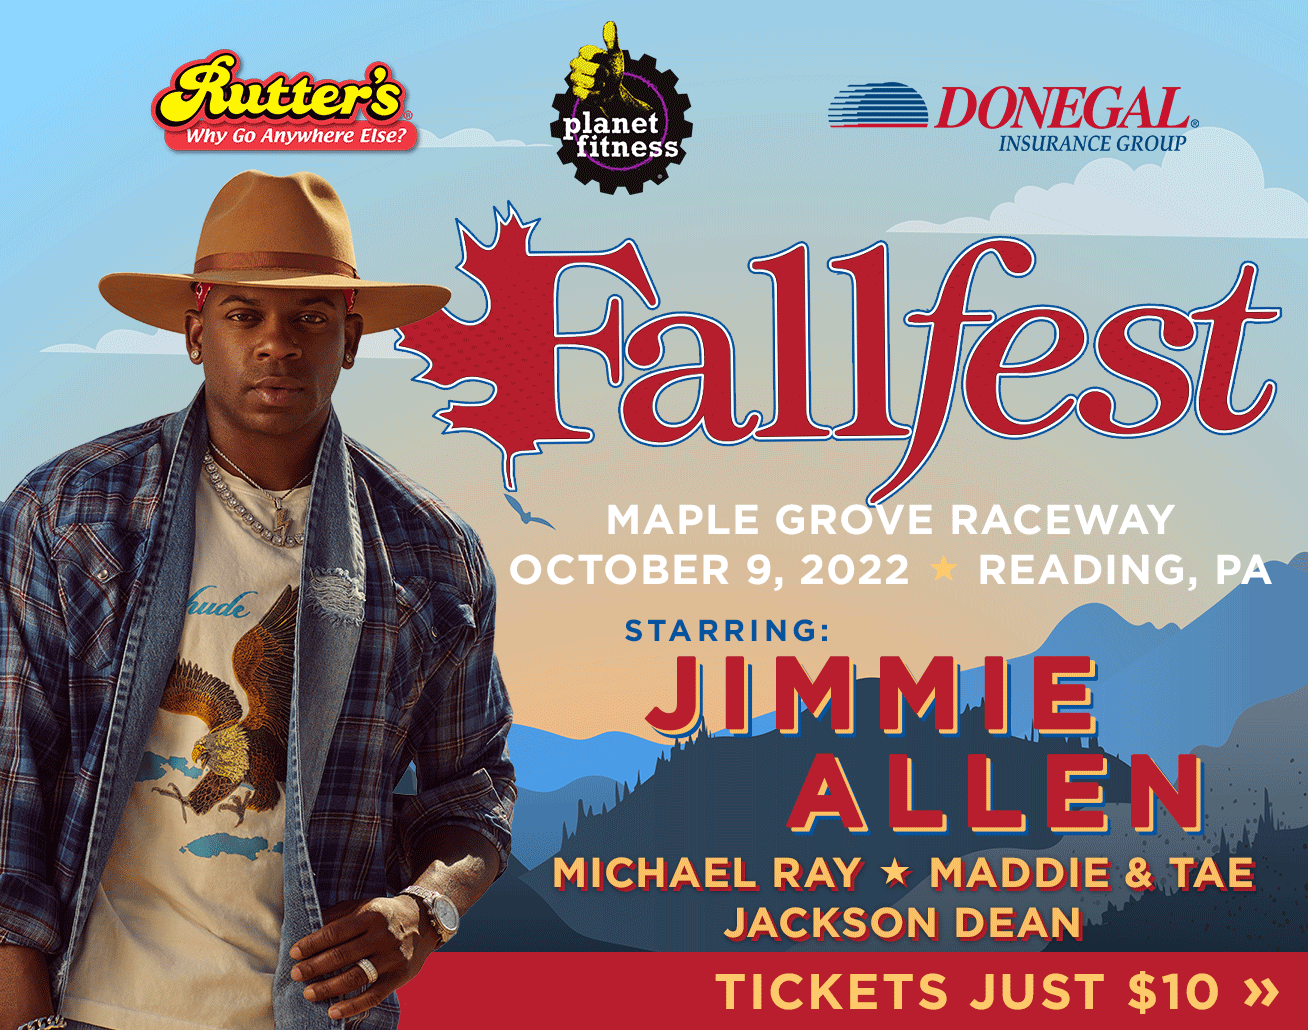 Fallfest Country Music Festival on October 9th at Maple Grove Raceway